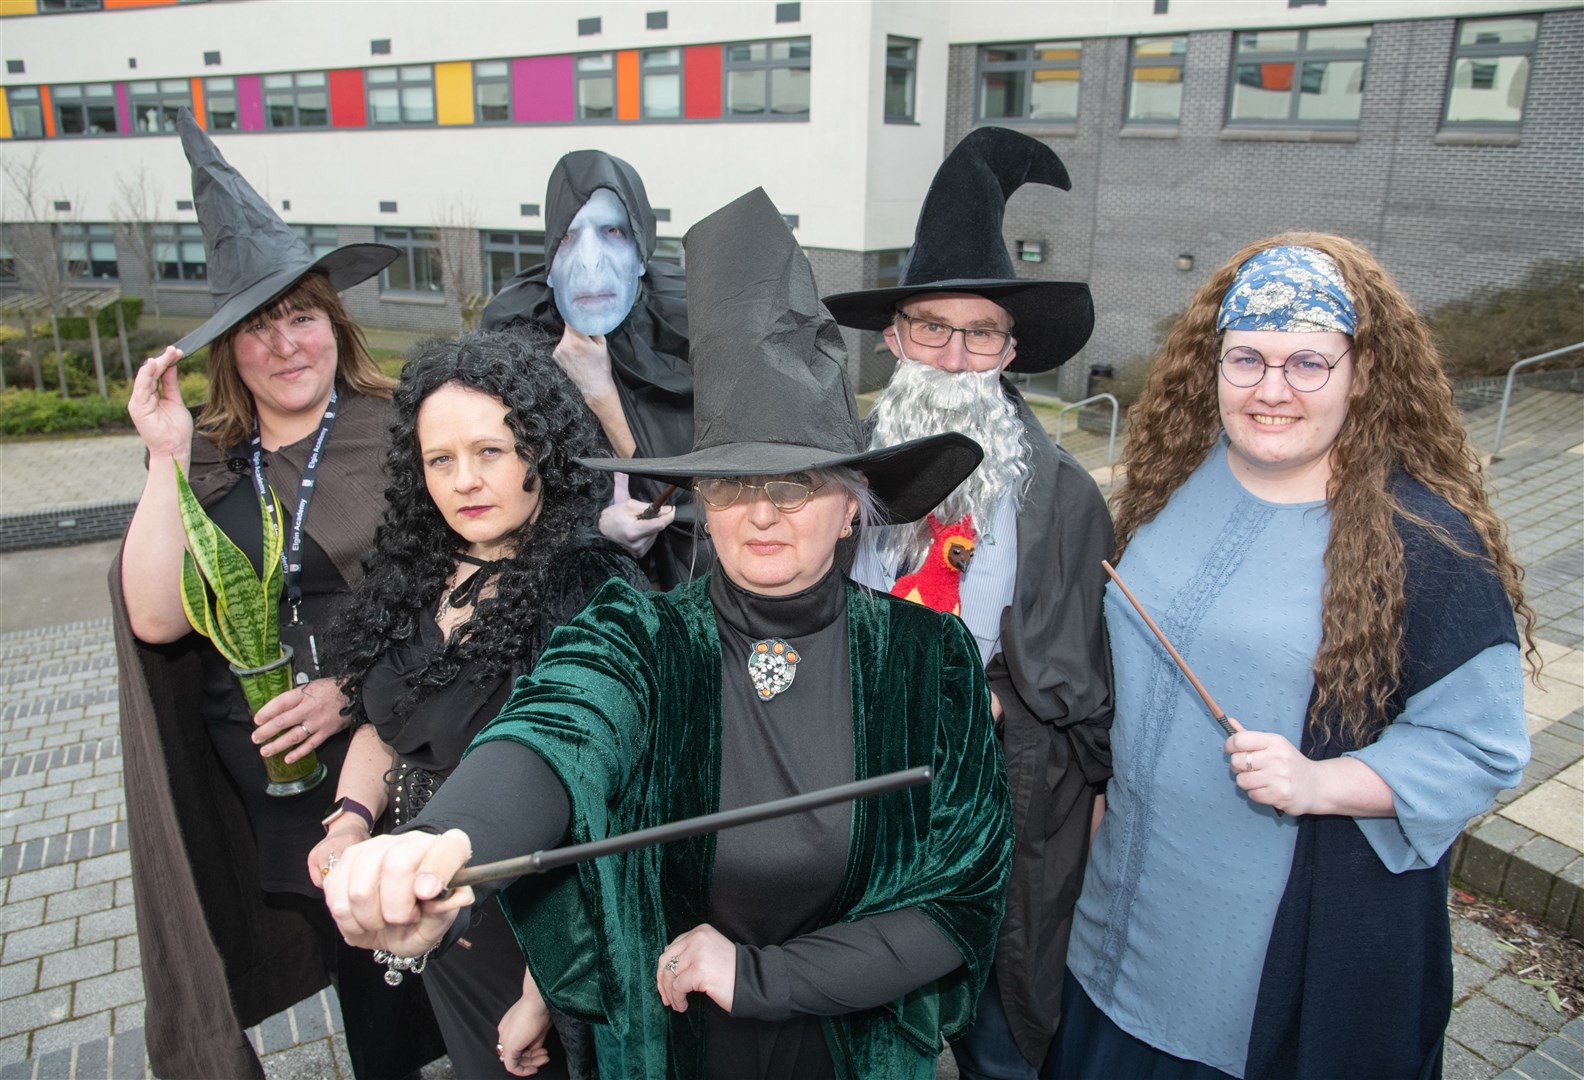 The Science departments came dressed as Hogwarts professors from Harry Potter. Picture: Daniel Forsyth